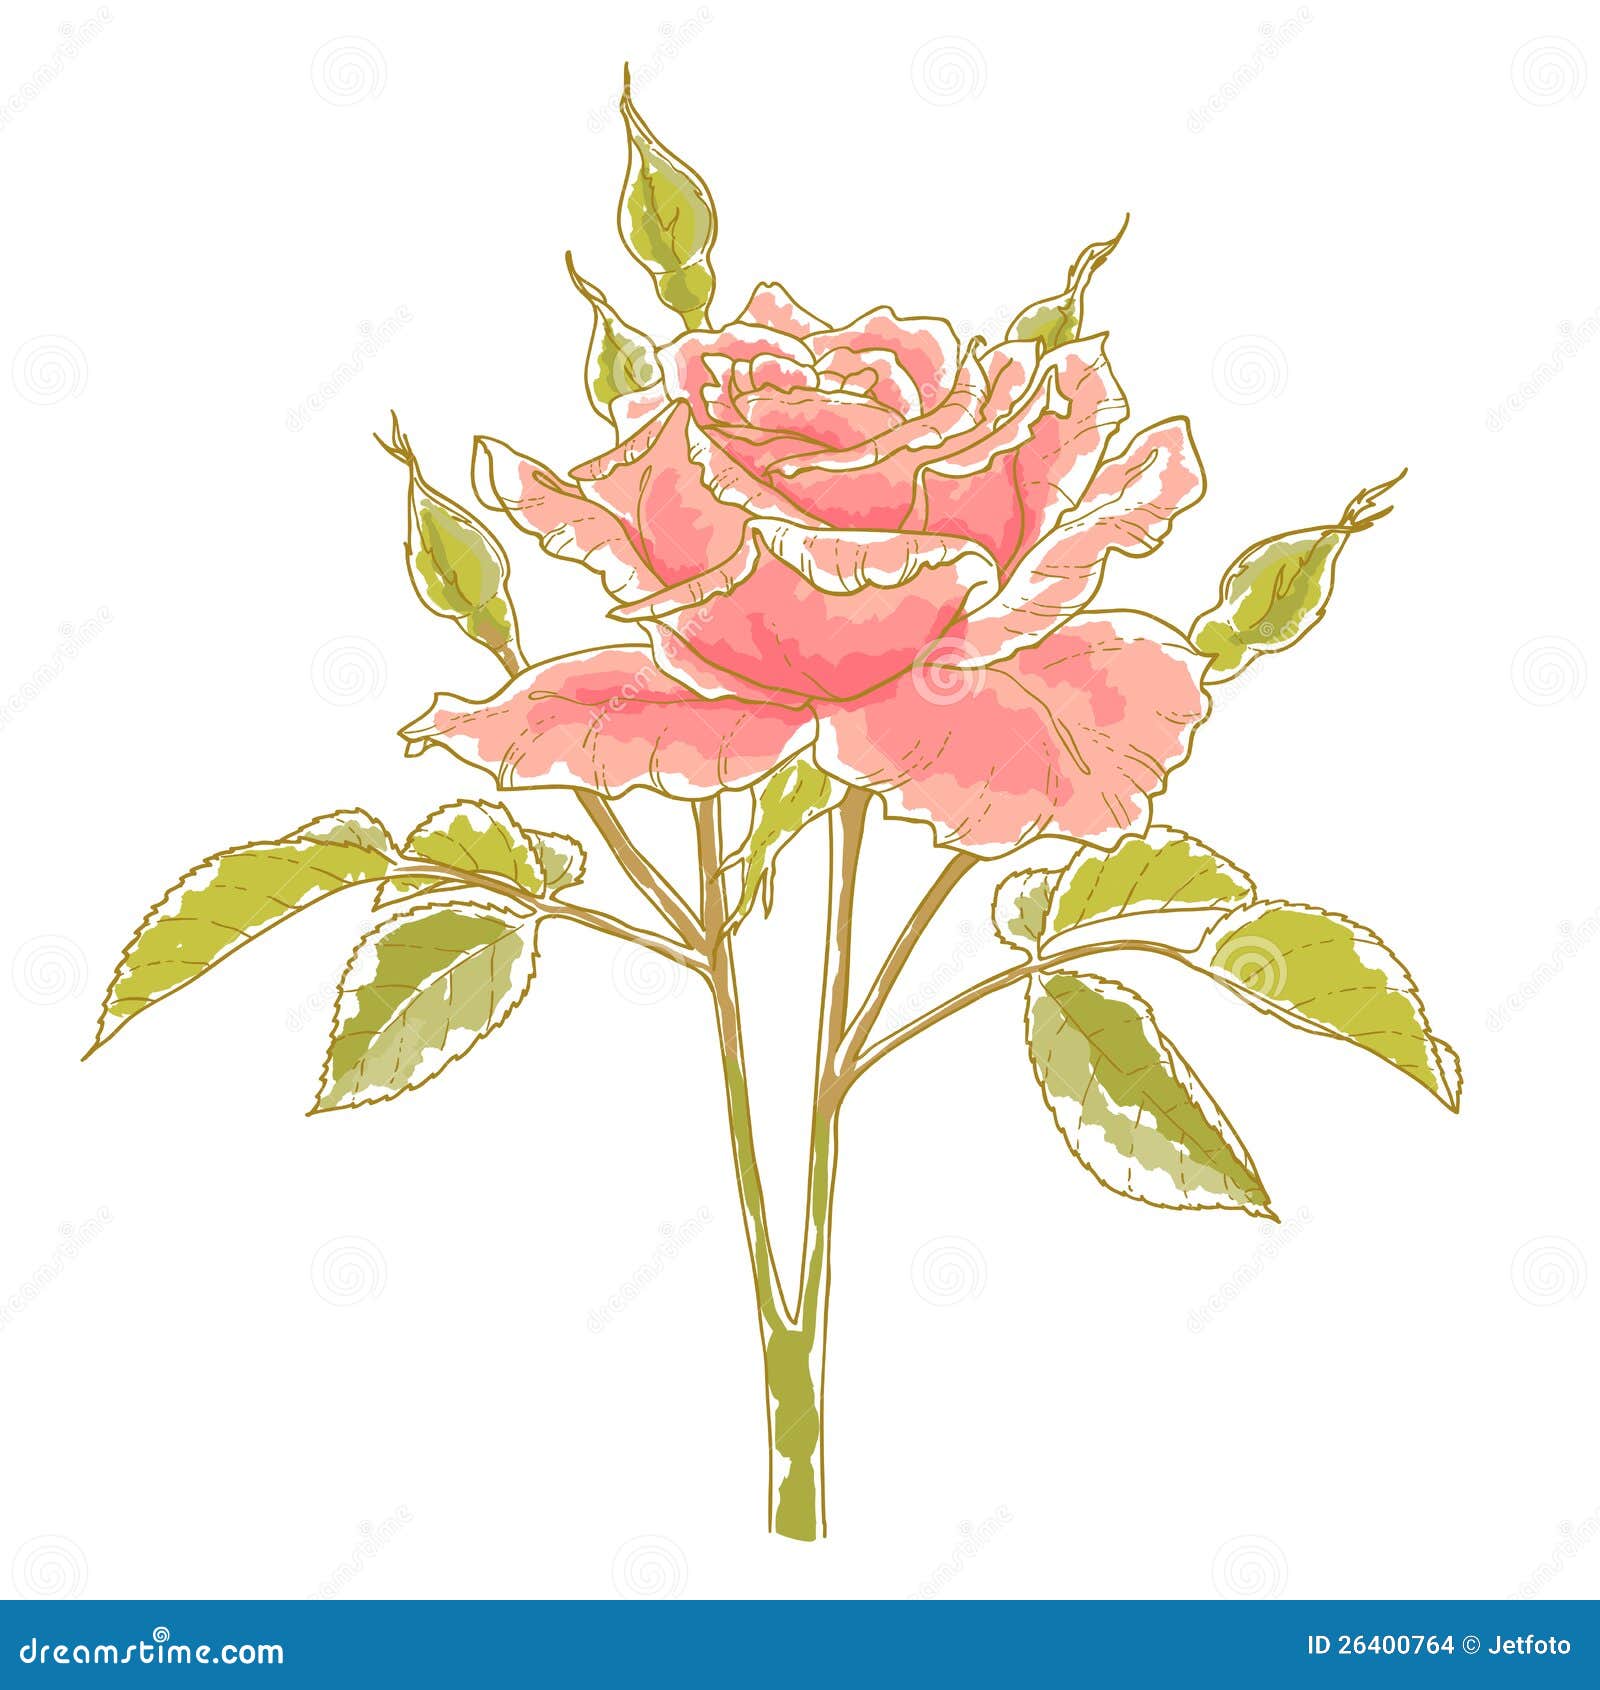 Pink rose stock vector. Illustration of brush, drawing - 26400764